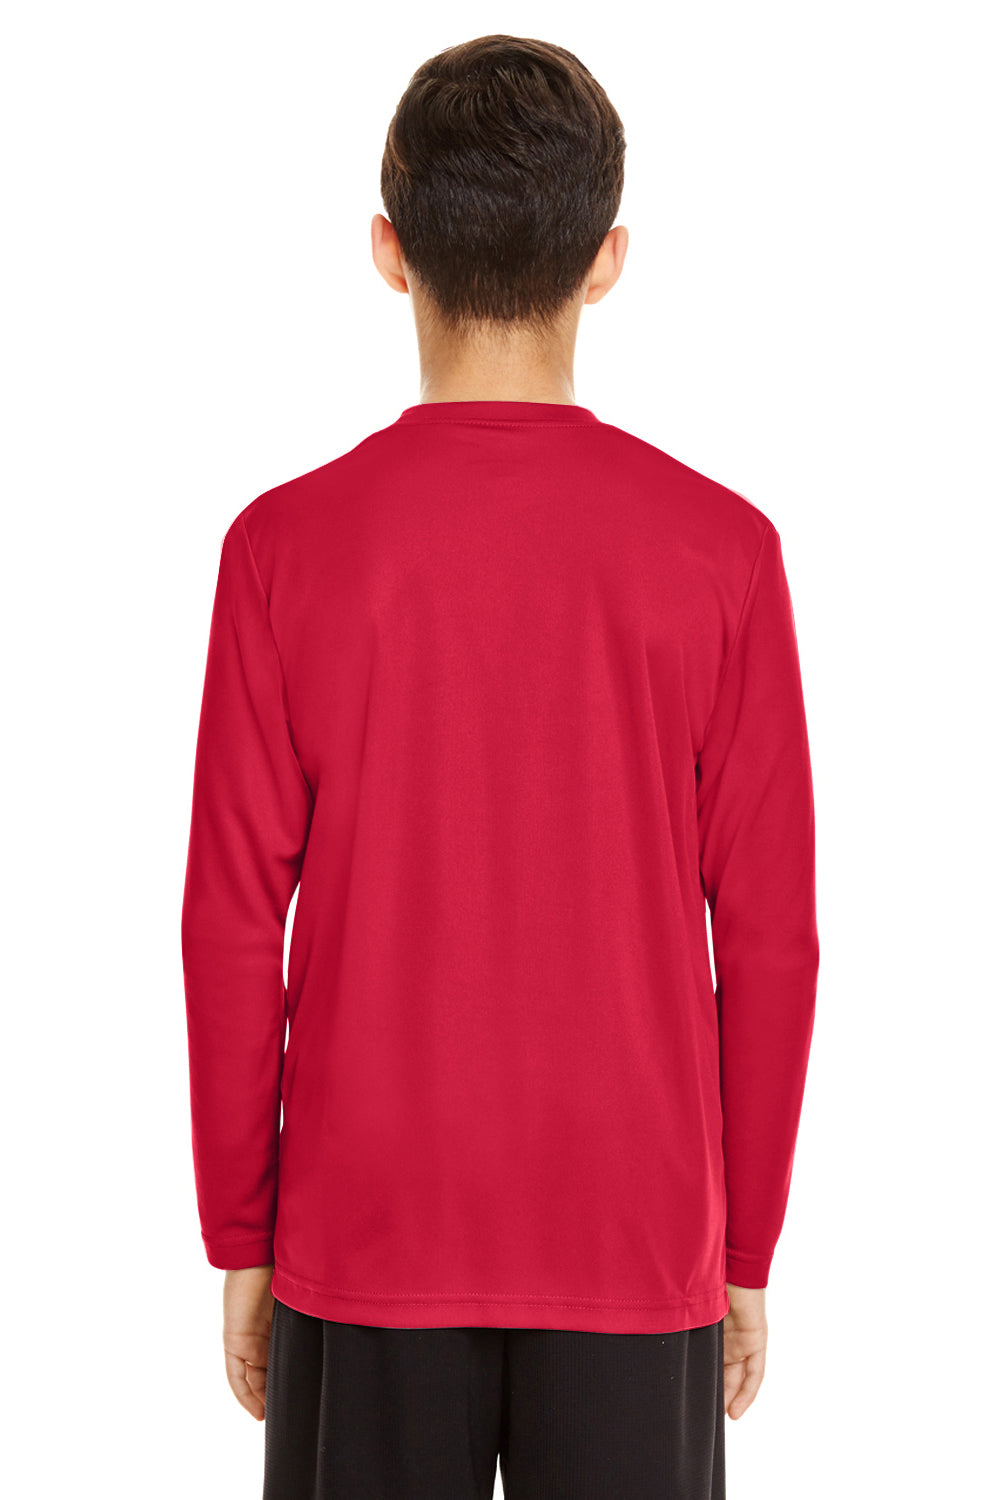 Team 365 TT11YL Youth Zone Performance Moisture Wicking Long Sleeve Crewneck T-Shirt Red Back